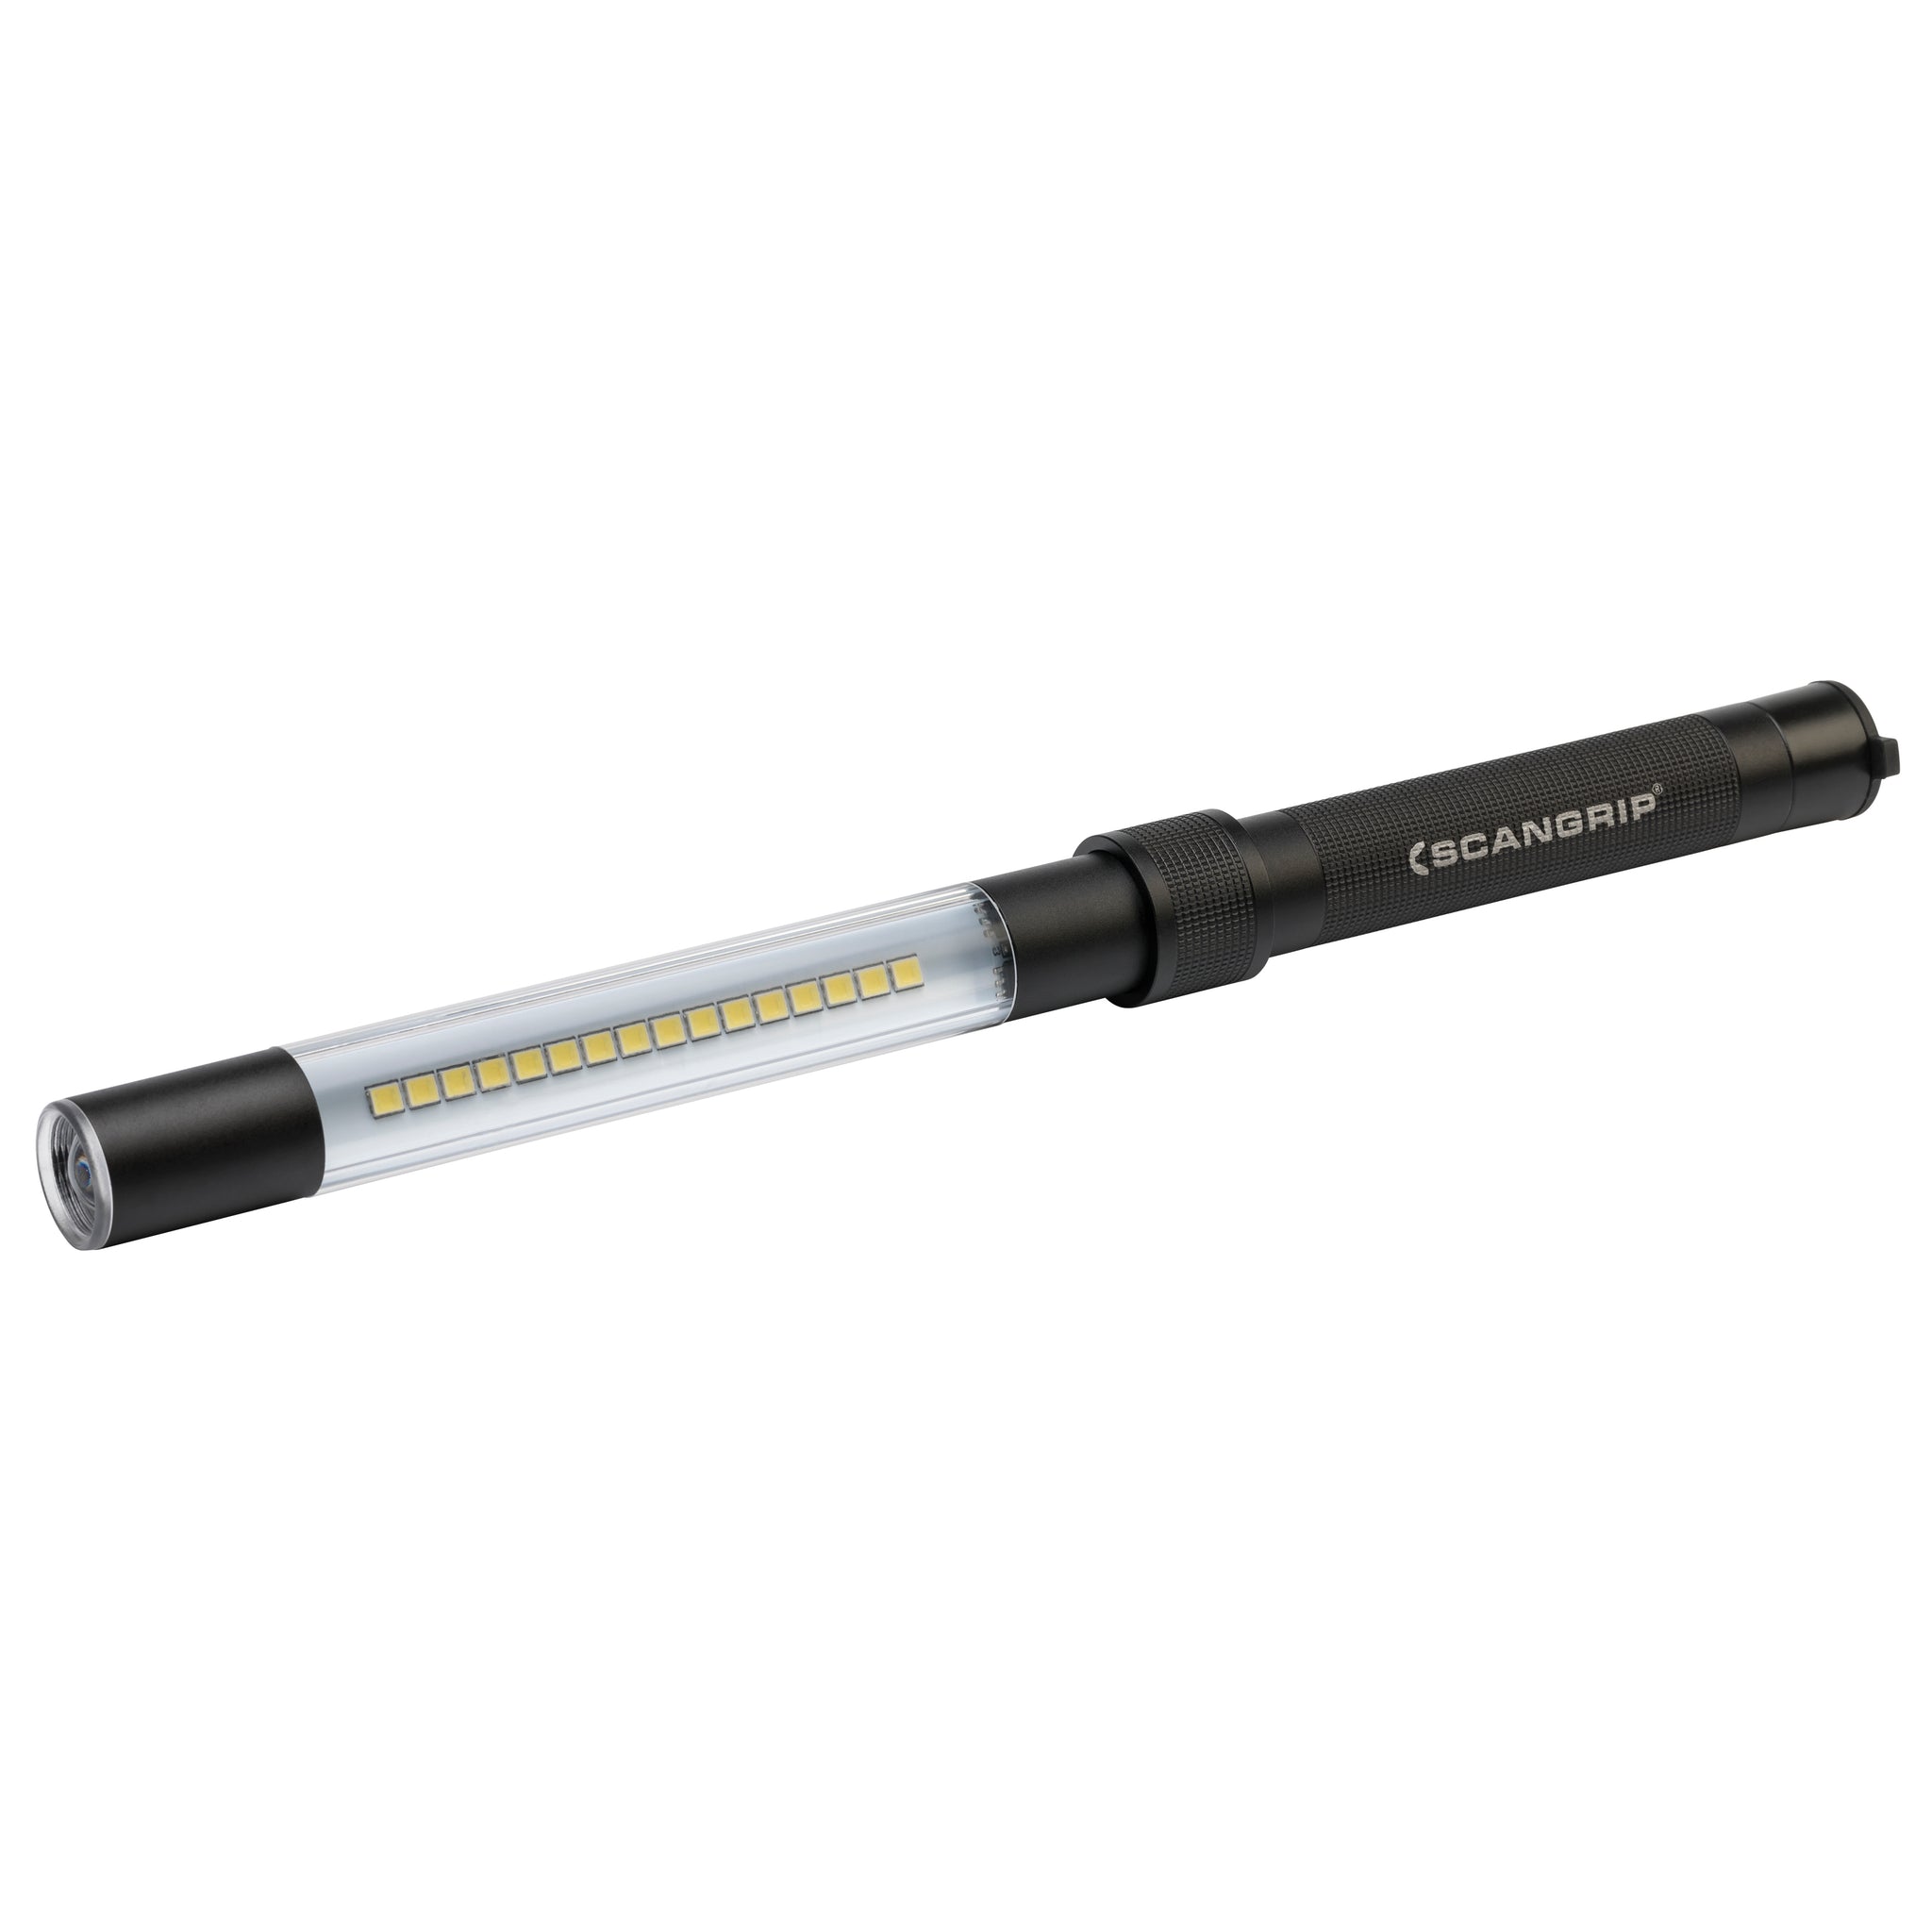 Scangrip LED pen torch with batteries